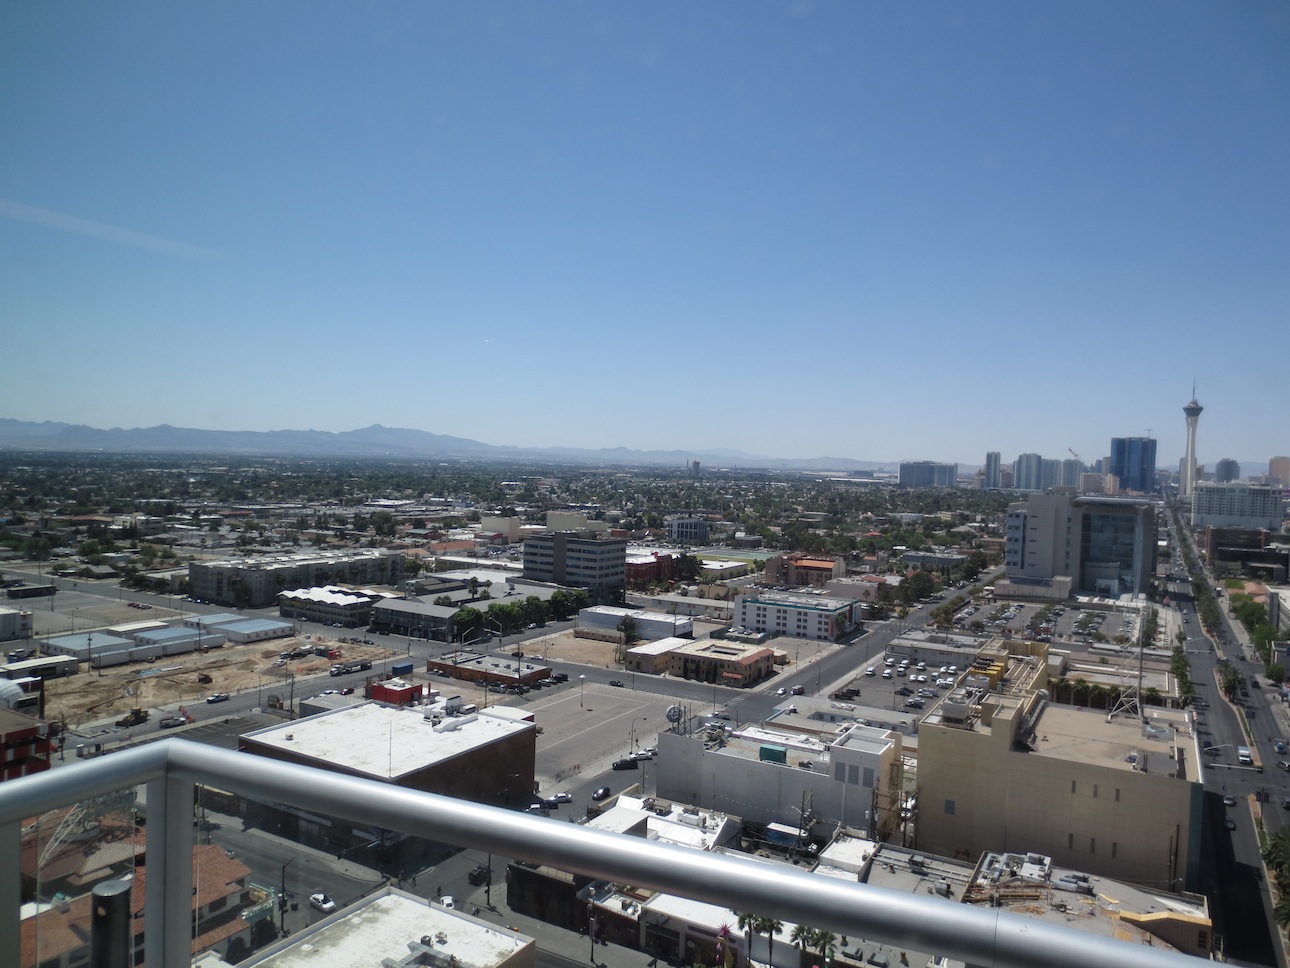 View of the new Vegas Strip from downtown.